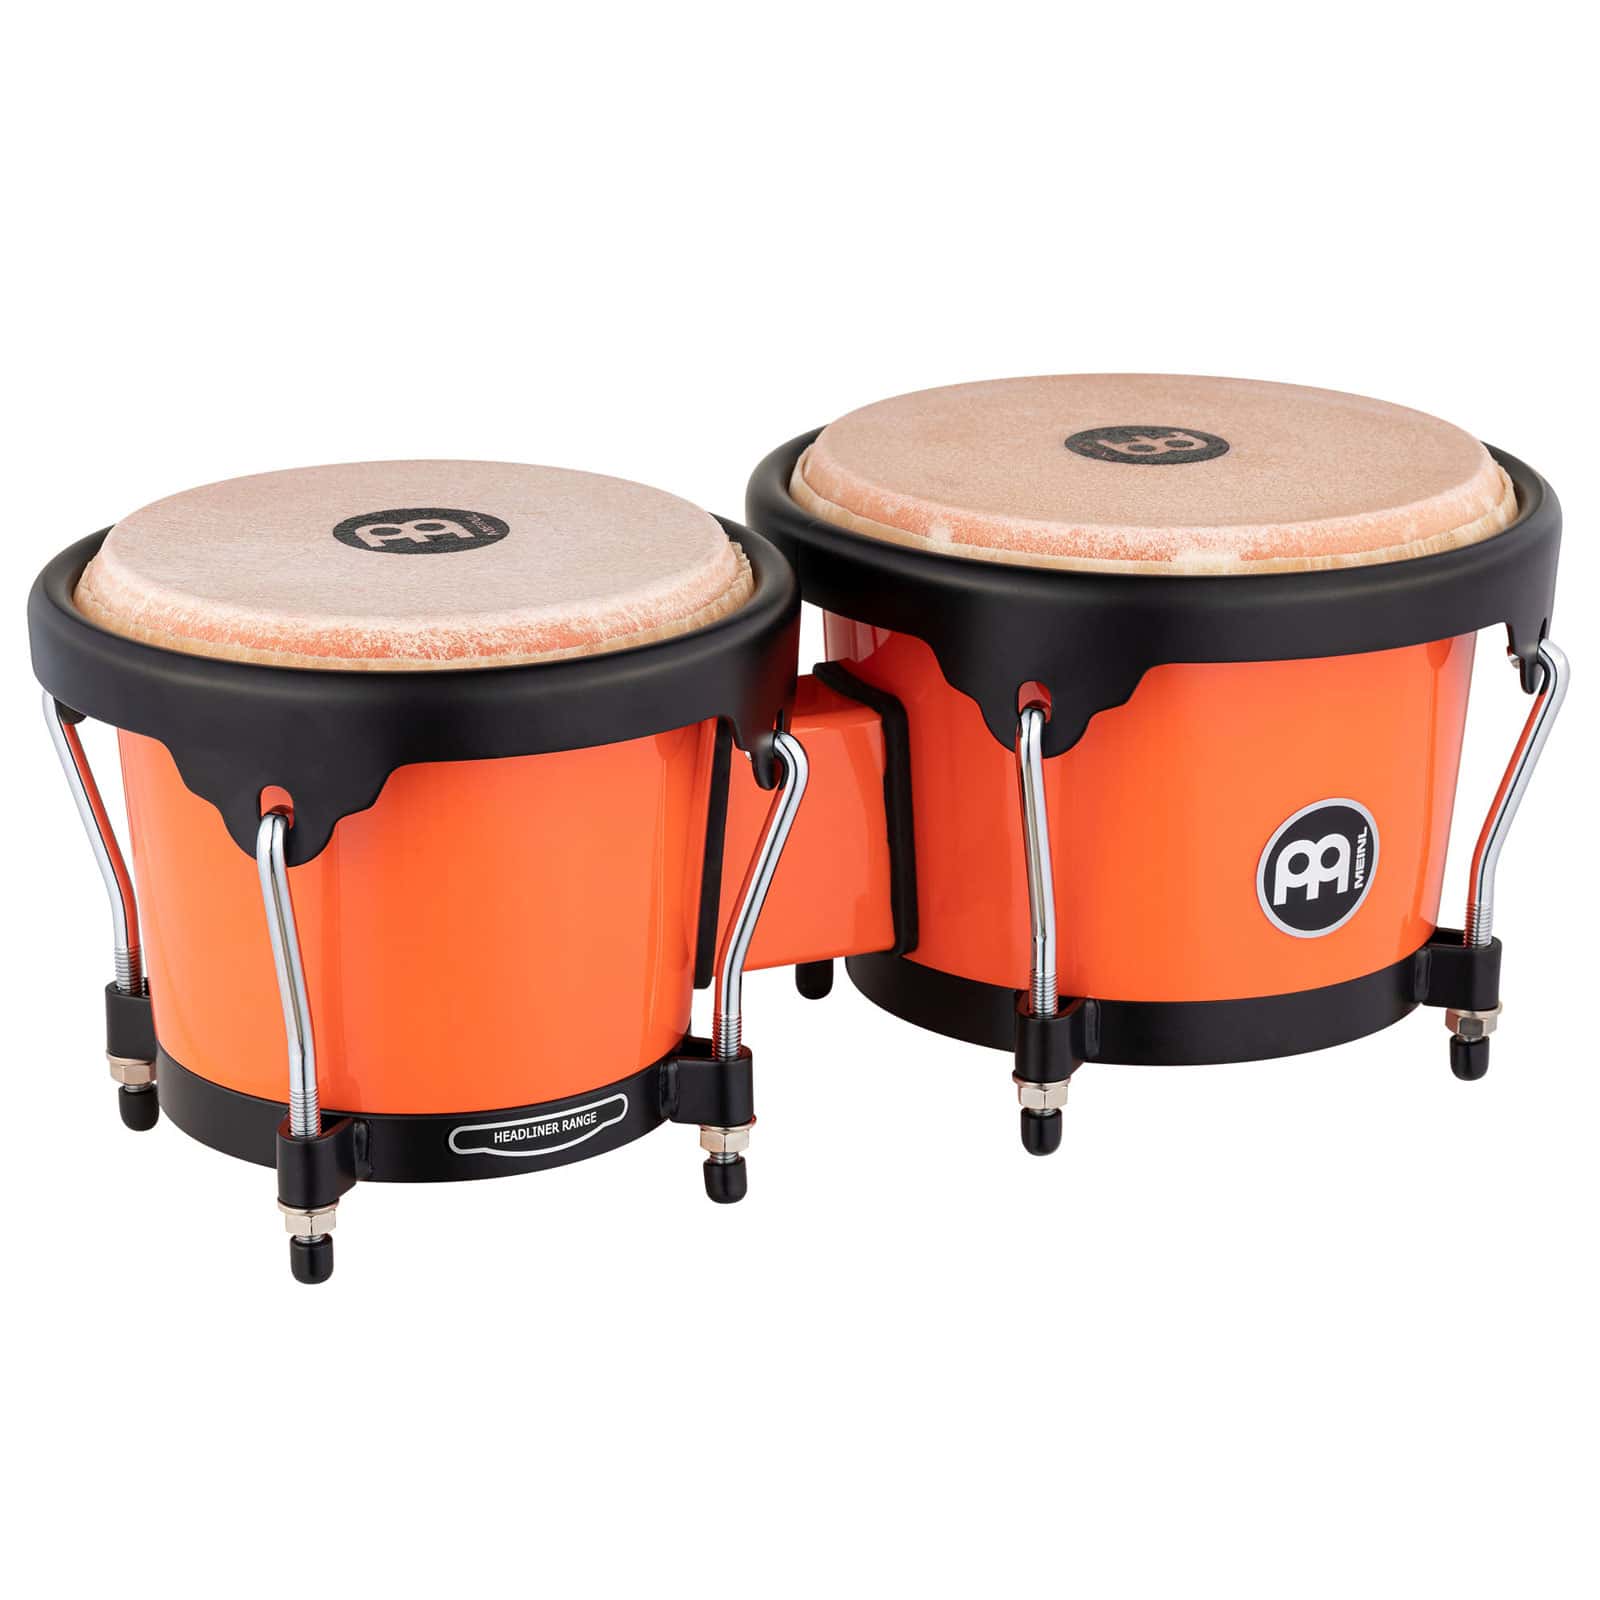 MEINL PERCUSSION JOURNEY SERIES HB50 BONGO, ELECTRIC CORAL